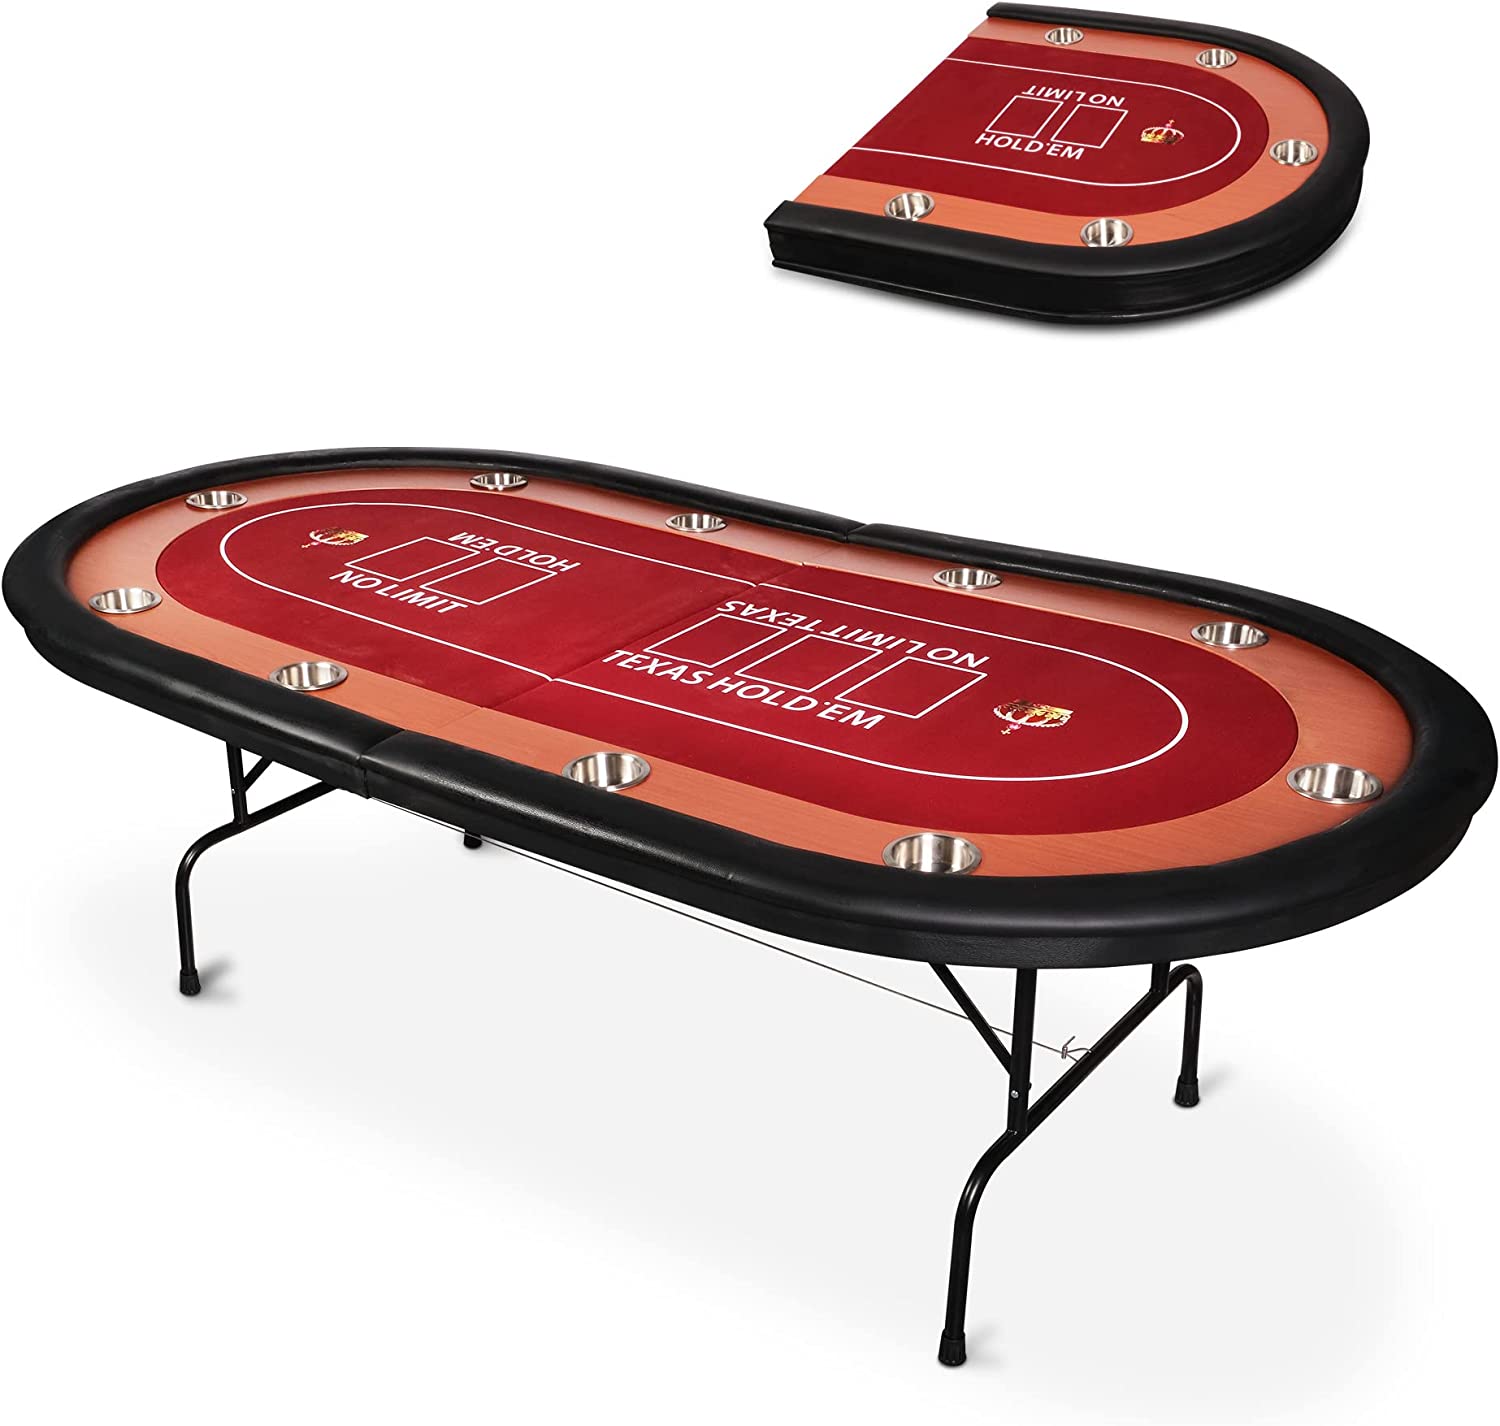 Poker Table Foldable Large 10 Players Casino Table Texas Holdem  Red Felt Surface With 10 Stainless Steel Cup Holders & Padded Poker Table